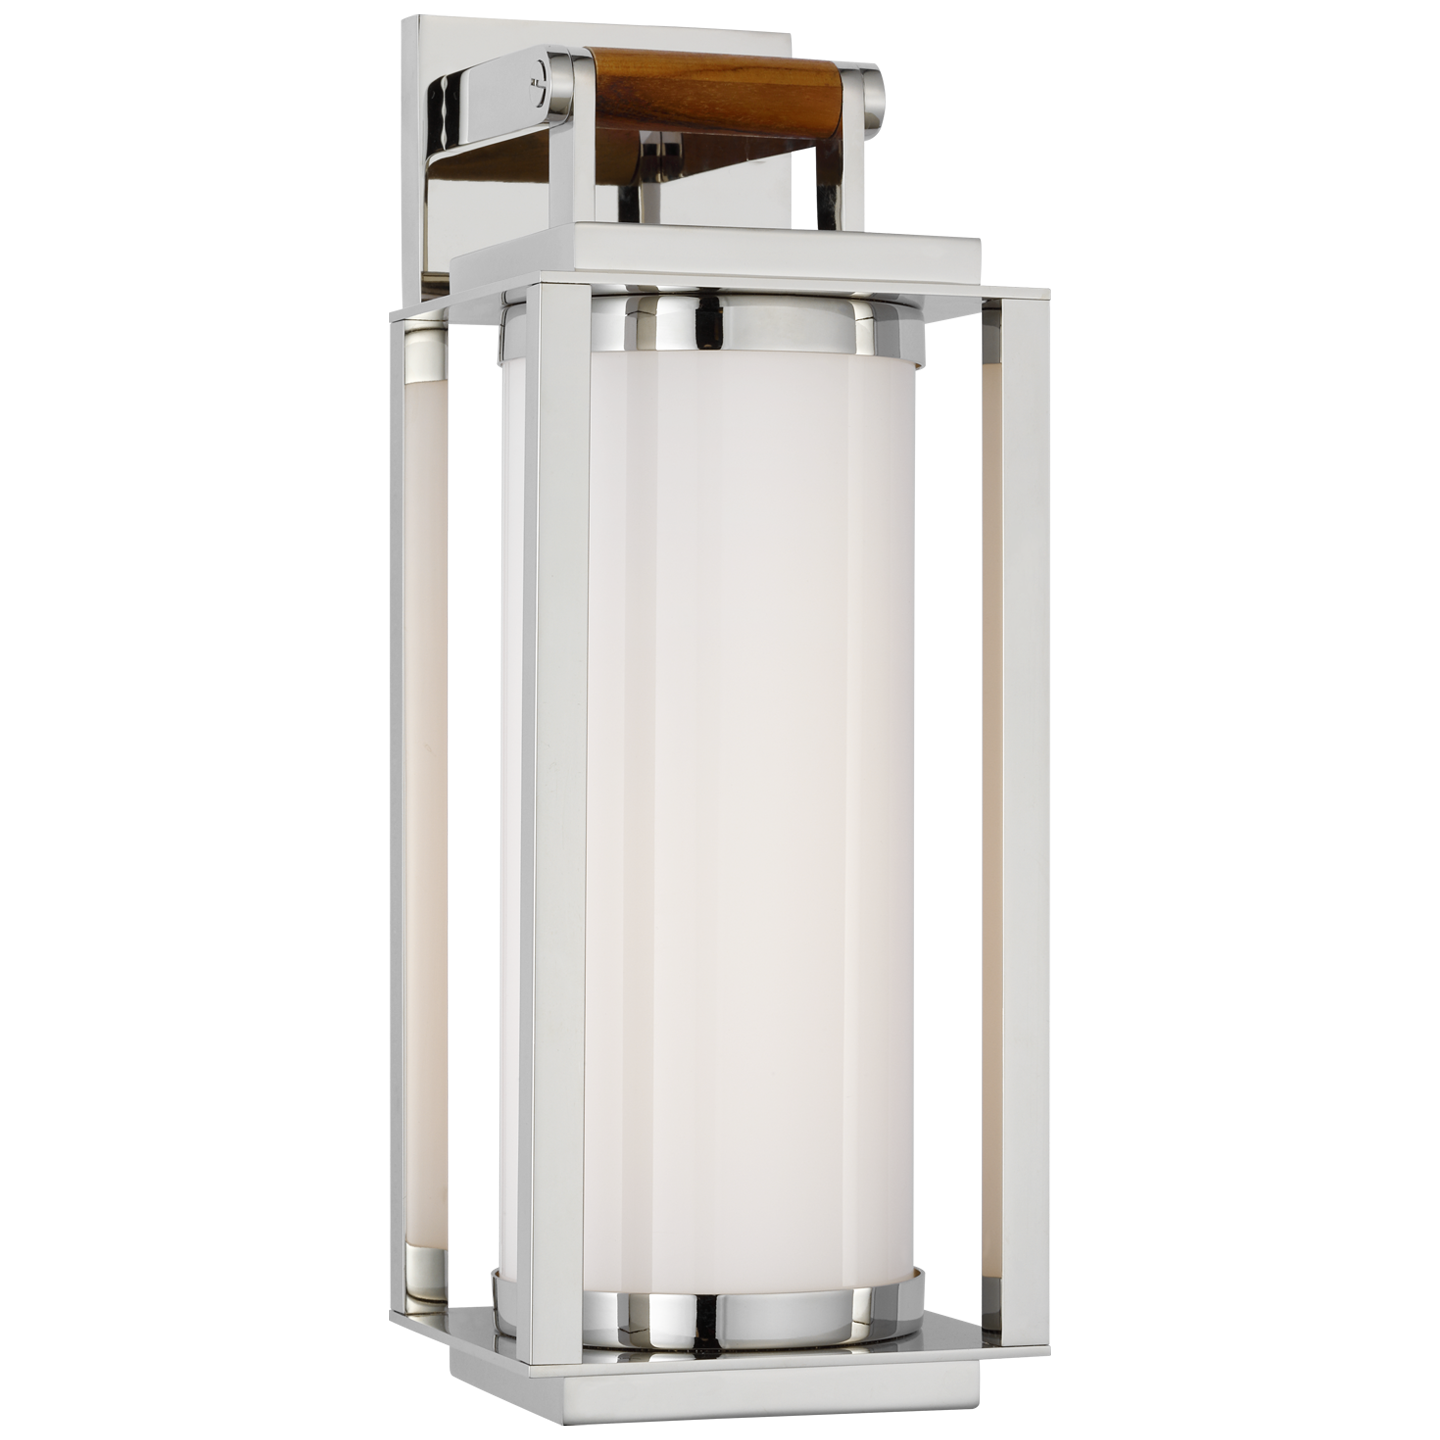 Northport Lantern Sconce - Polished Nickel and White Glass